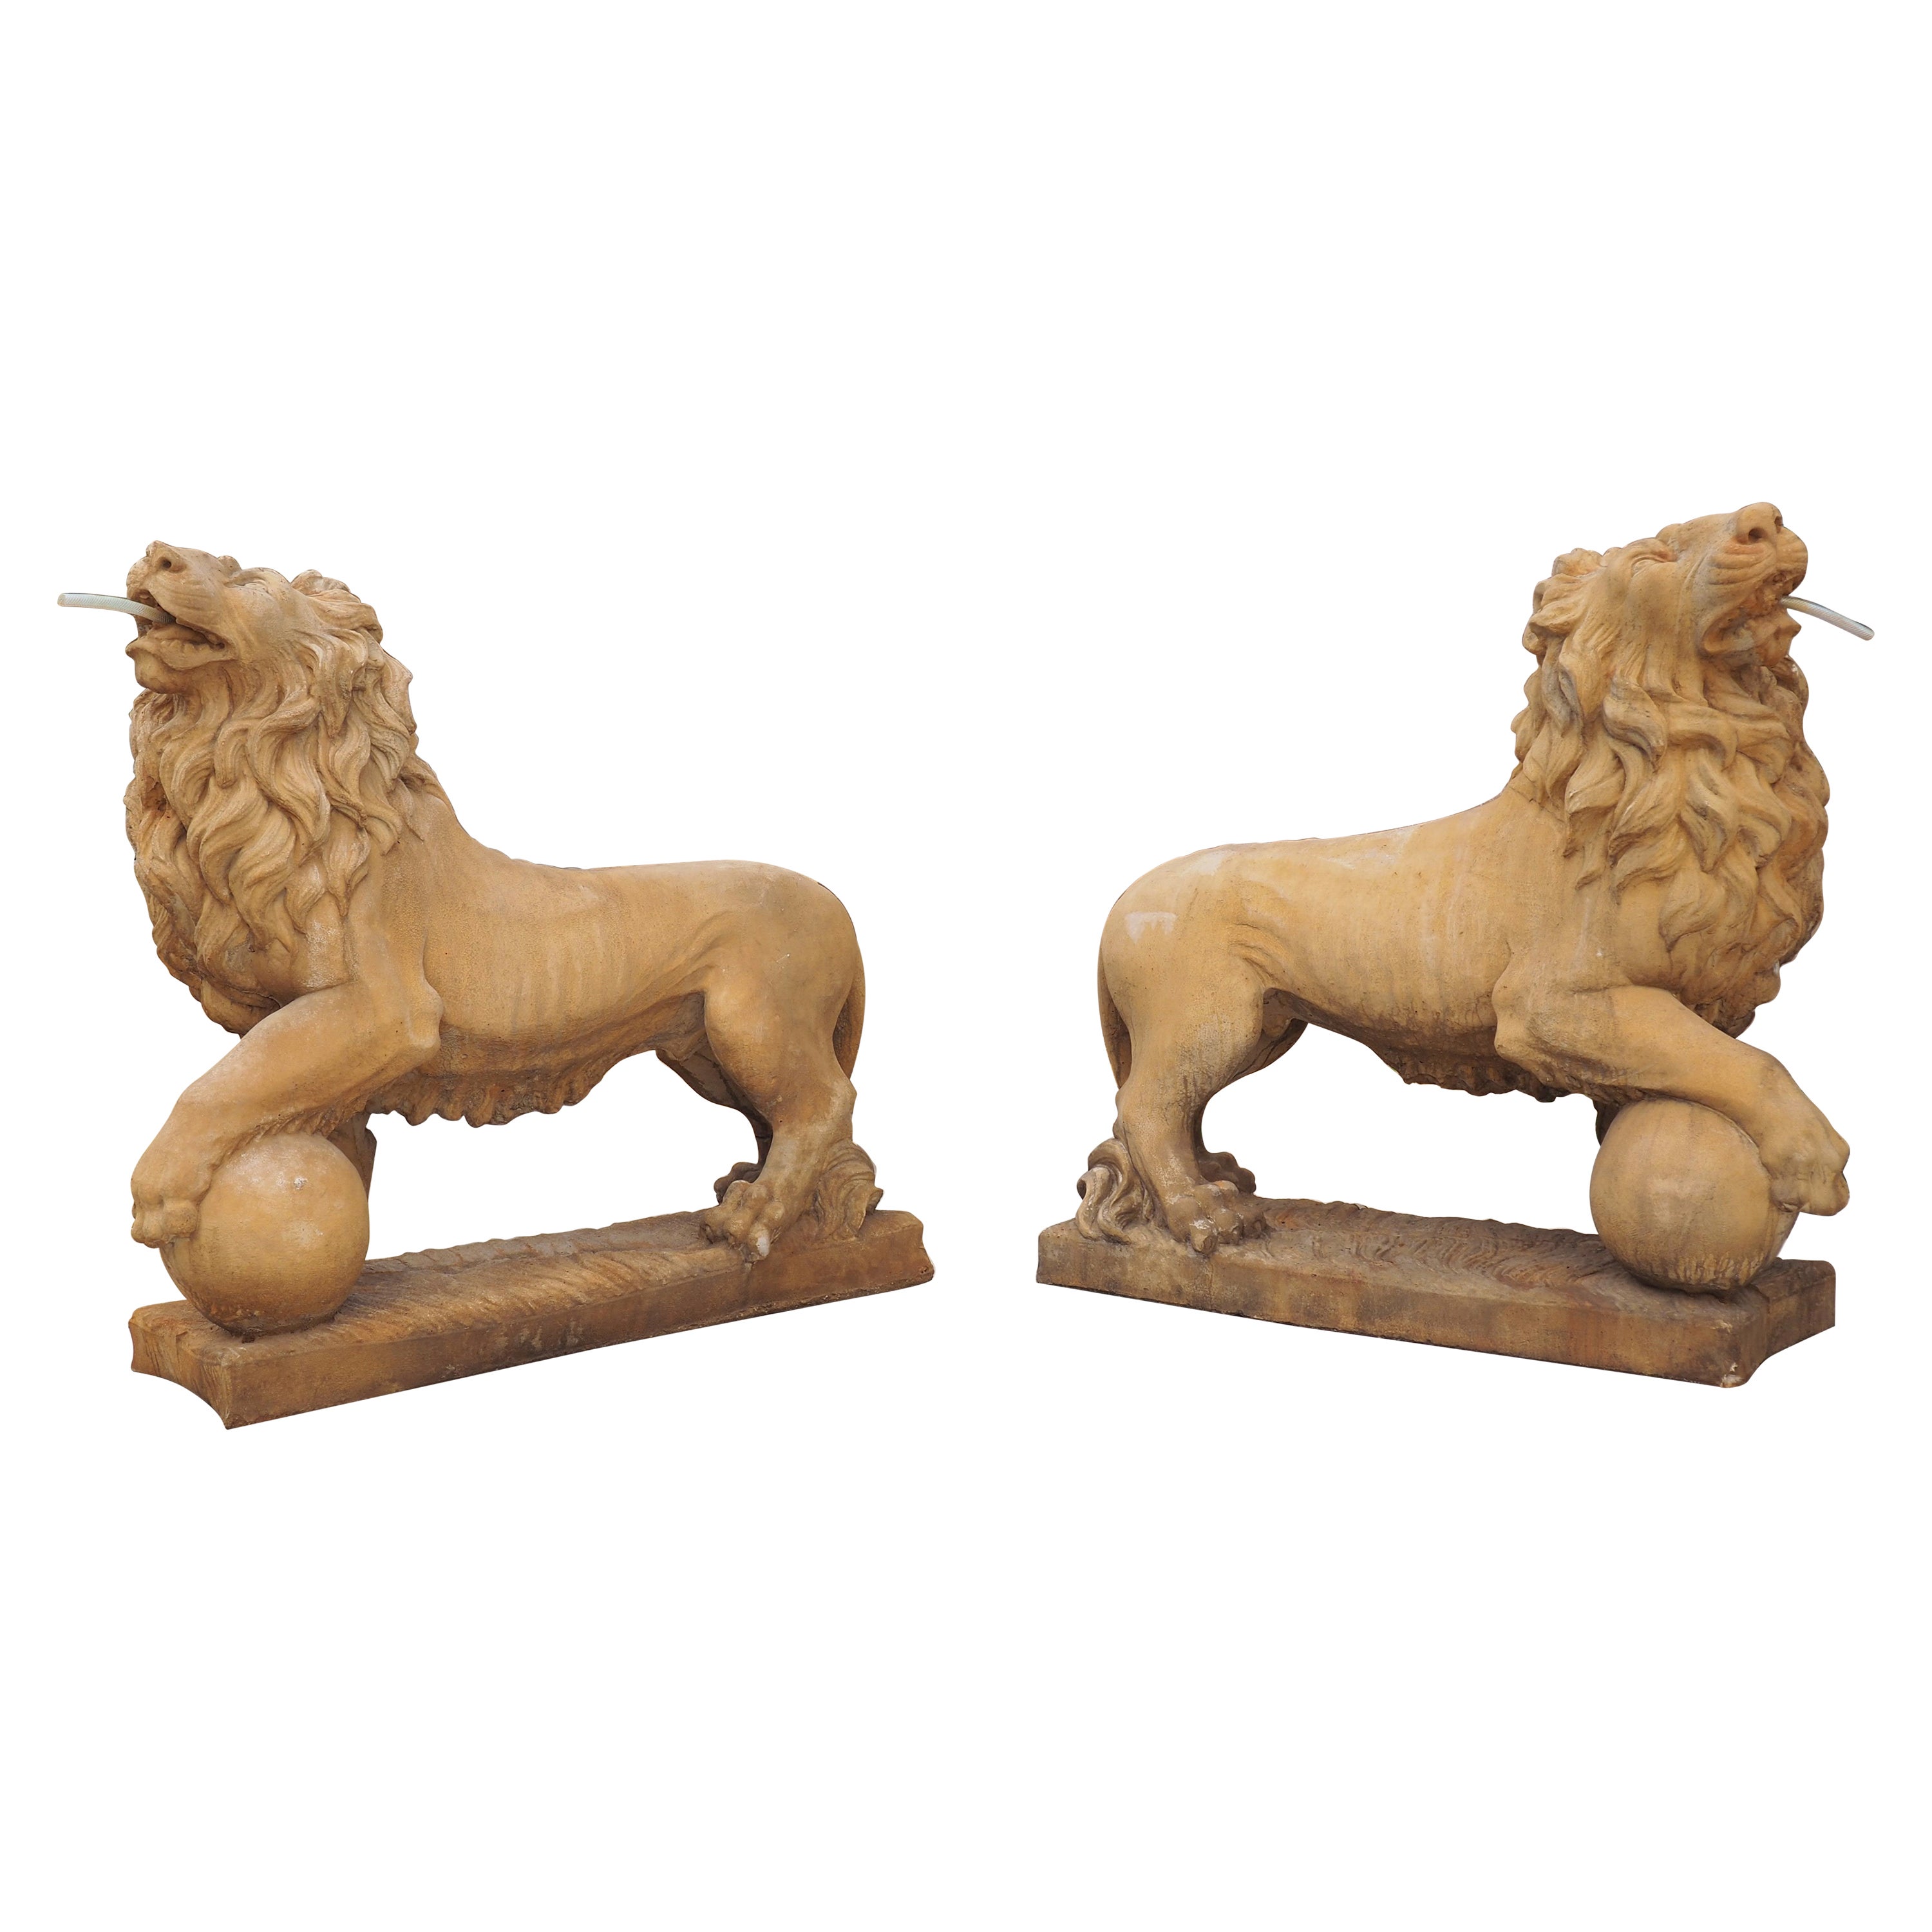 Pair of Large Cast Medici Lion Statues or Fountain Elements from France